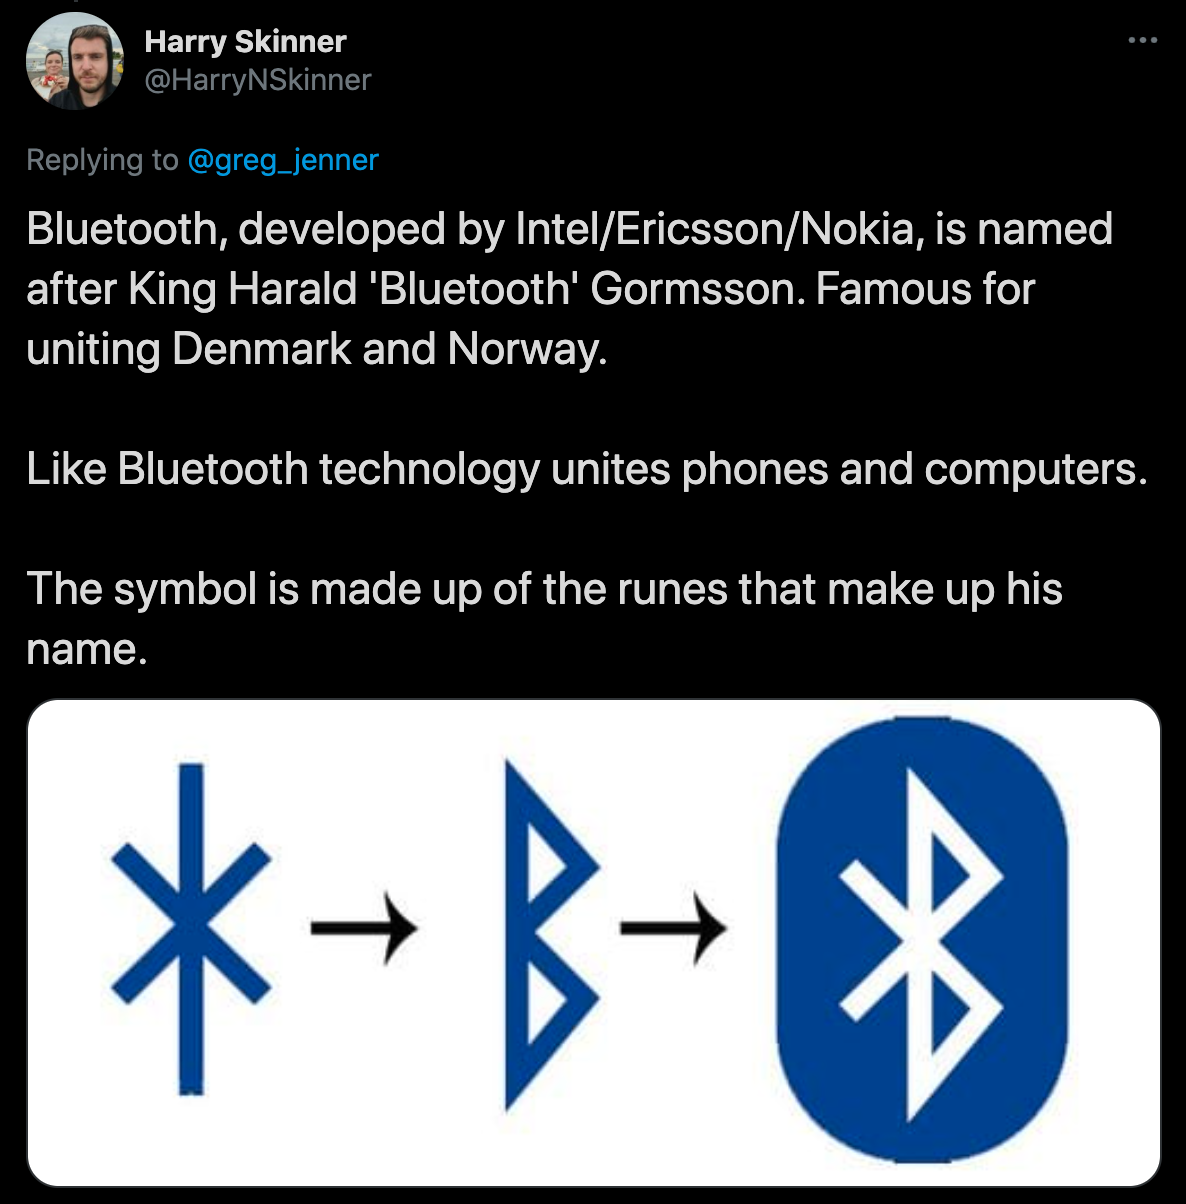 cool facts - Bluetooth, developed by IntelEricssonNokia, is named after King Harald 'Bluetooth' Gormsson. Famous for uniting Denmark and Norway. Bluetooth technology unites phones and computers. The symbol is made up of the runes that